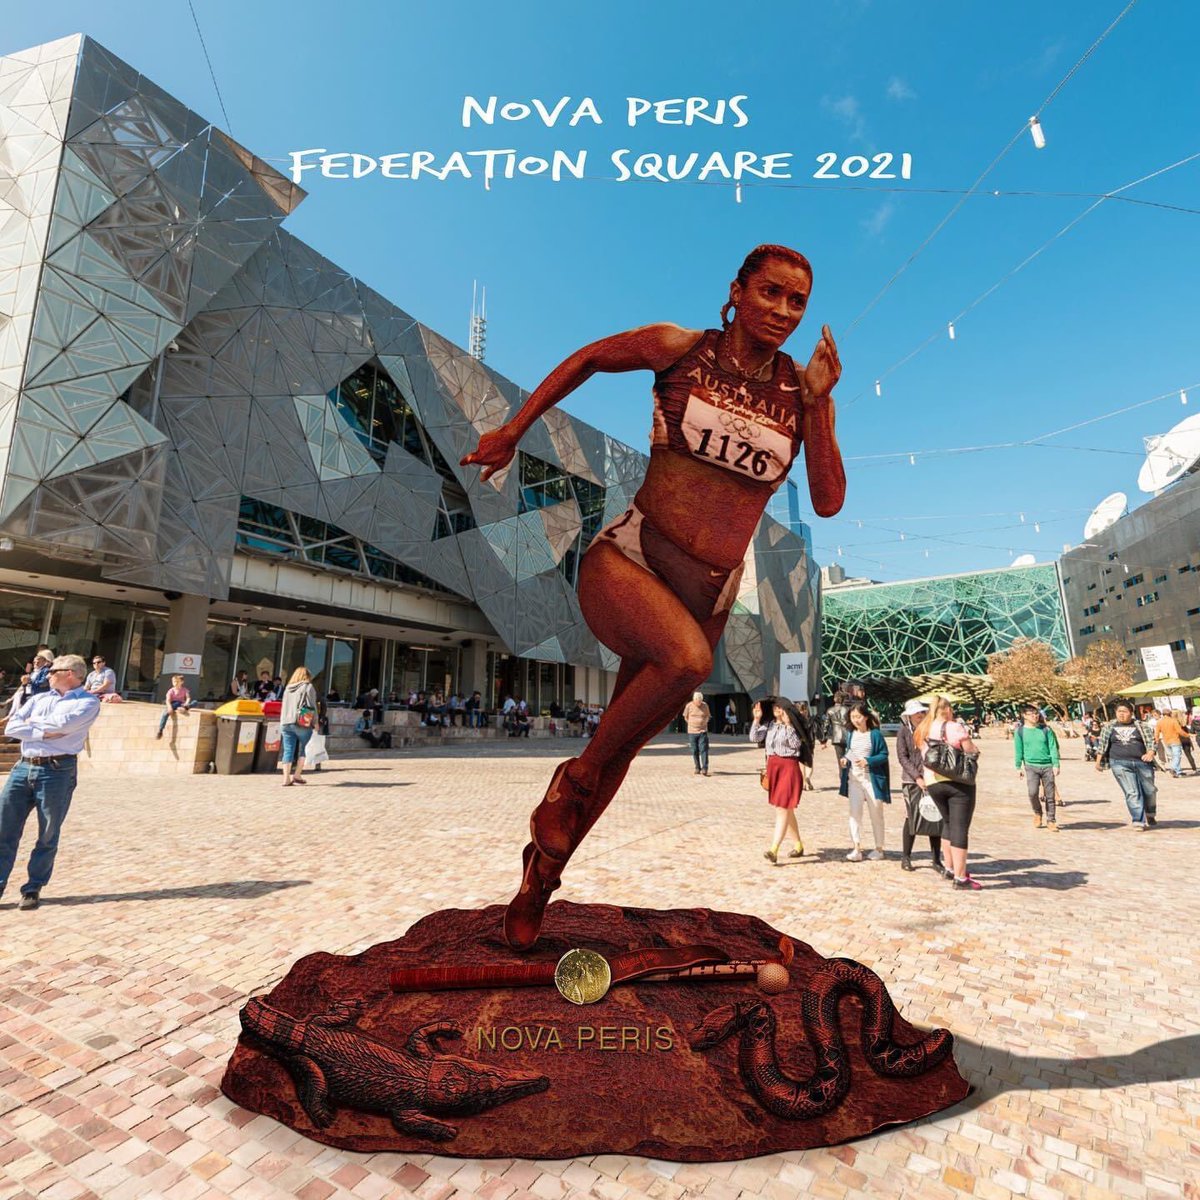 Can’t wait for the unveiling next year at the start of #reconciliationweek in #federationsquare #melbourne #bronzestatue #novaperis #dreamwalker 👣✊🏾